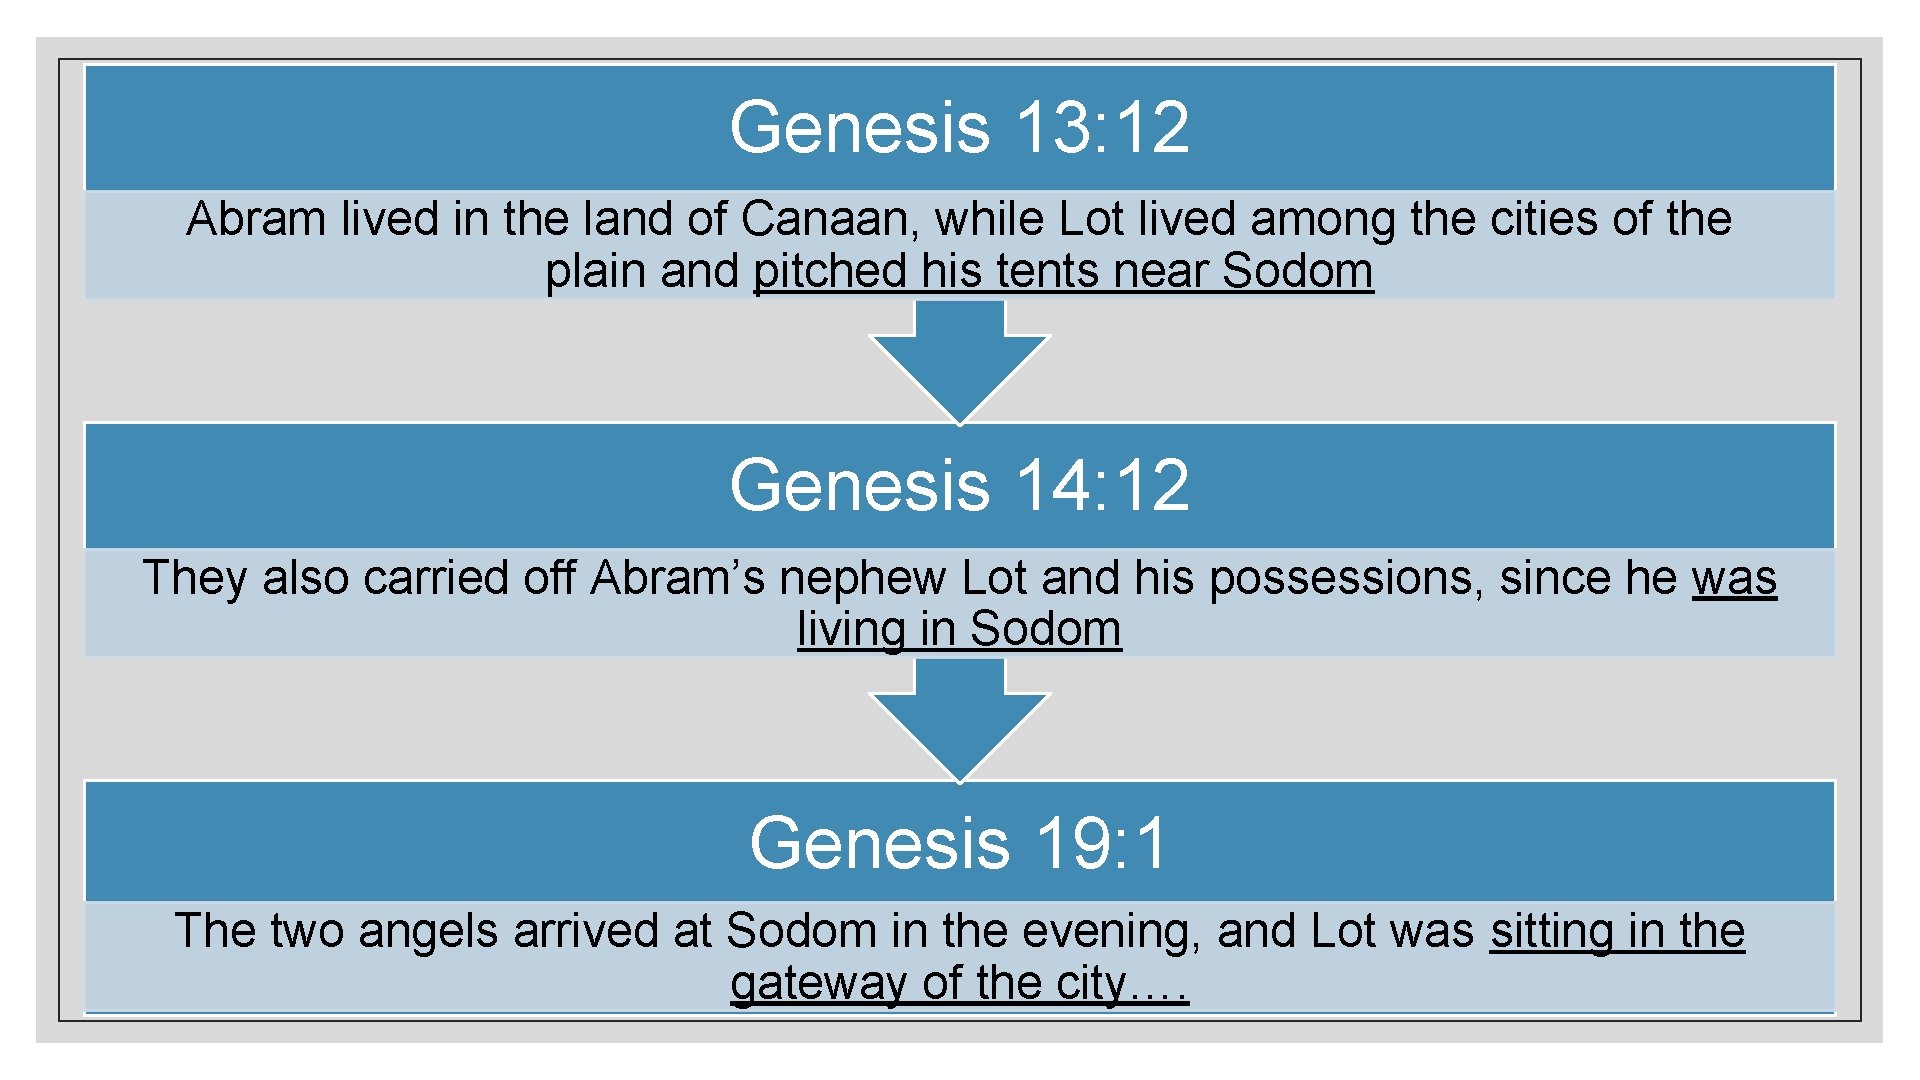 Genesis 13: 12 Abram lived in the land of Canaan, while Lot lived among